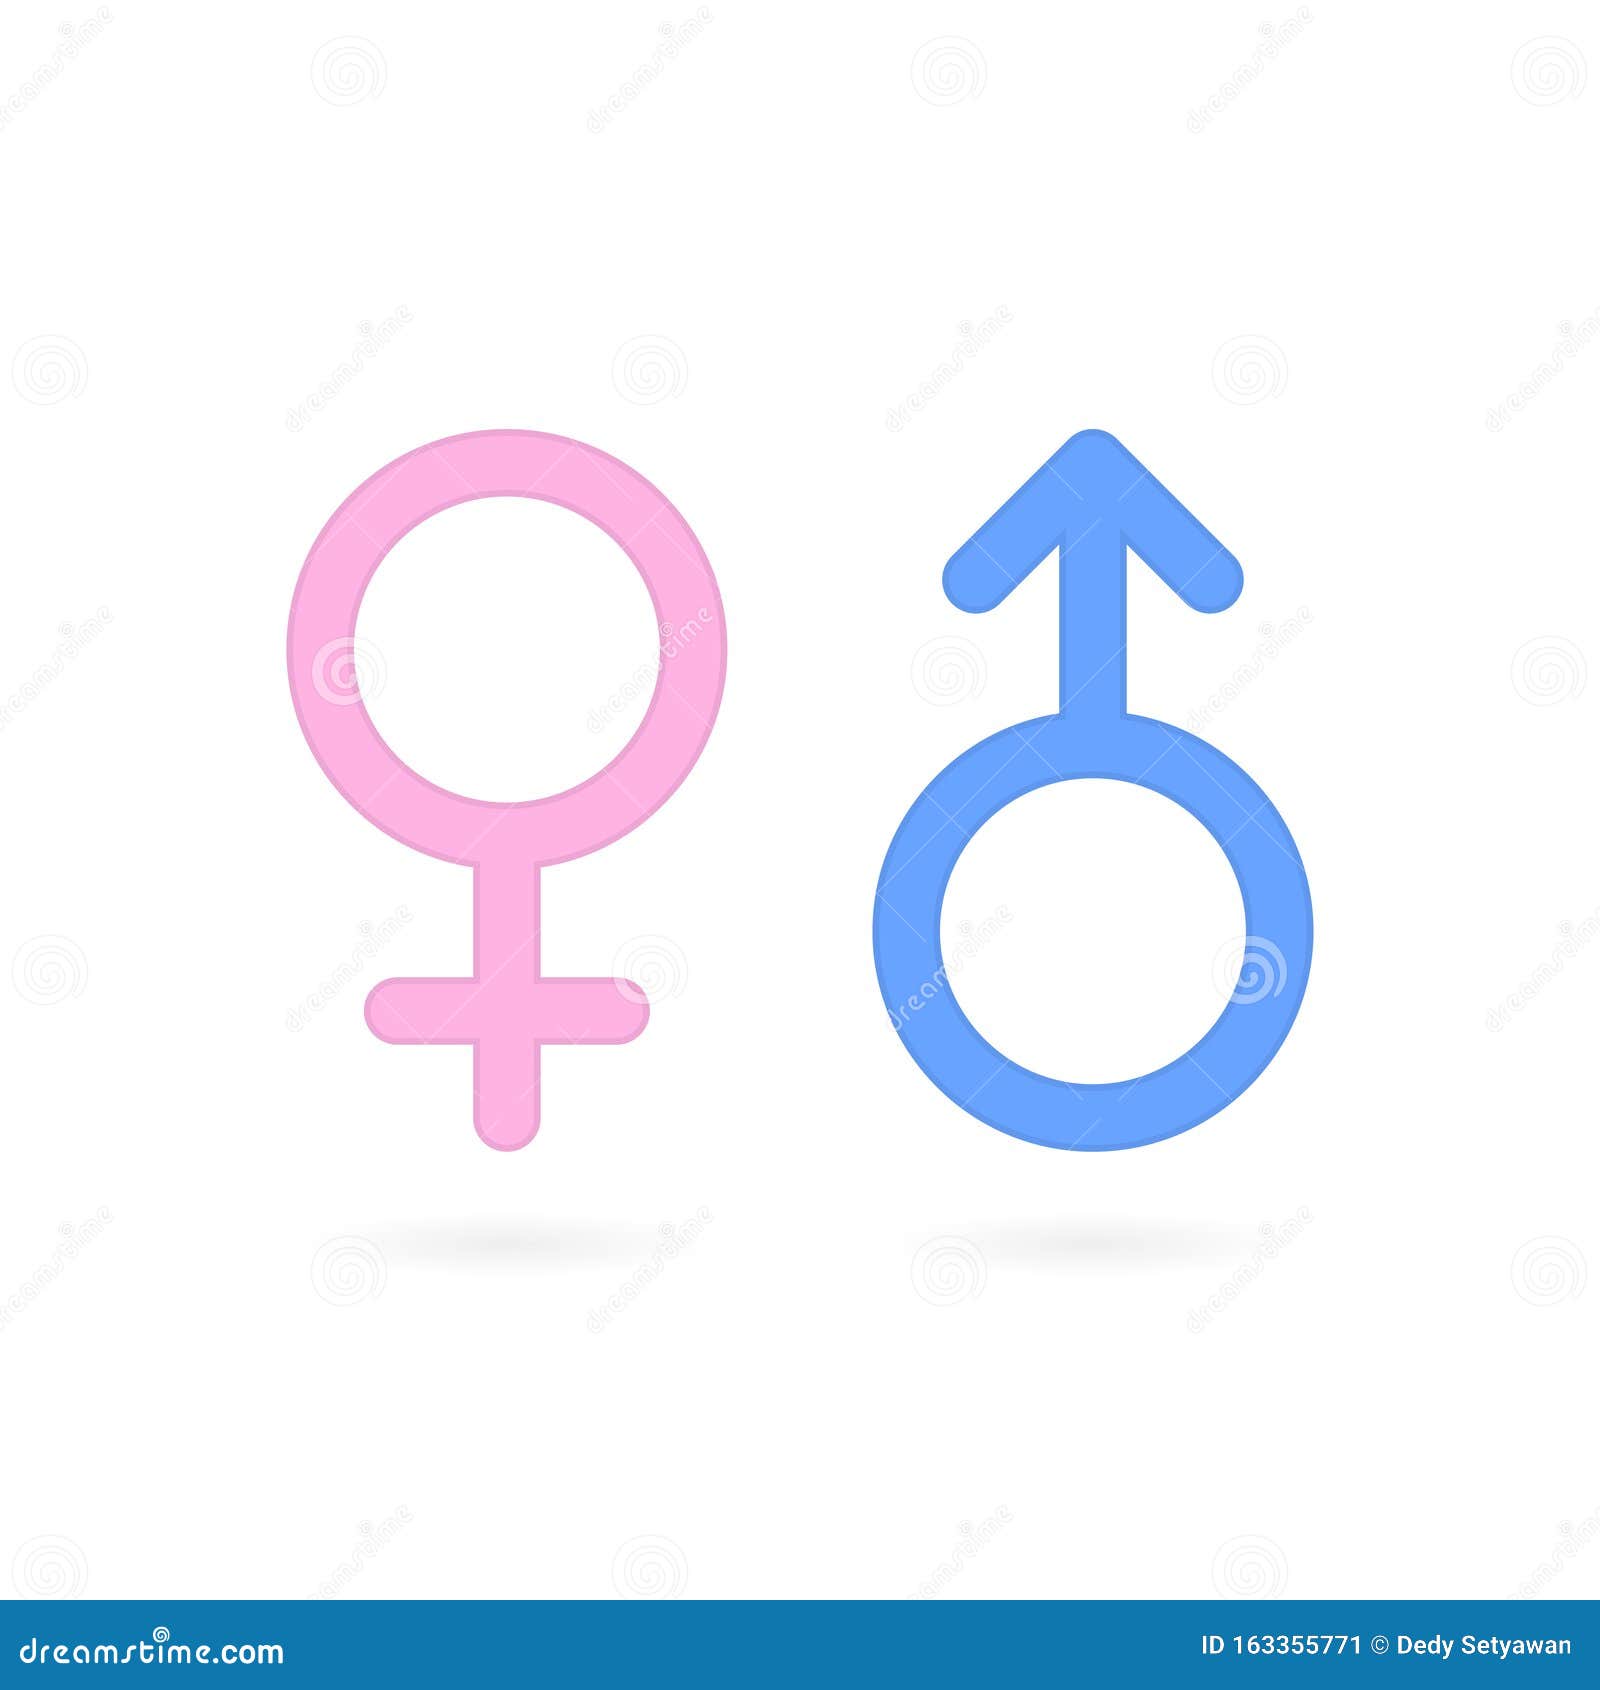 Female and Male Gender Icons Stock Vector - Illustration of gender ...